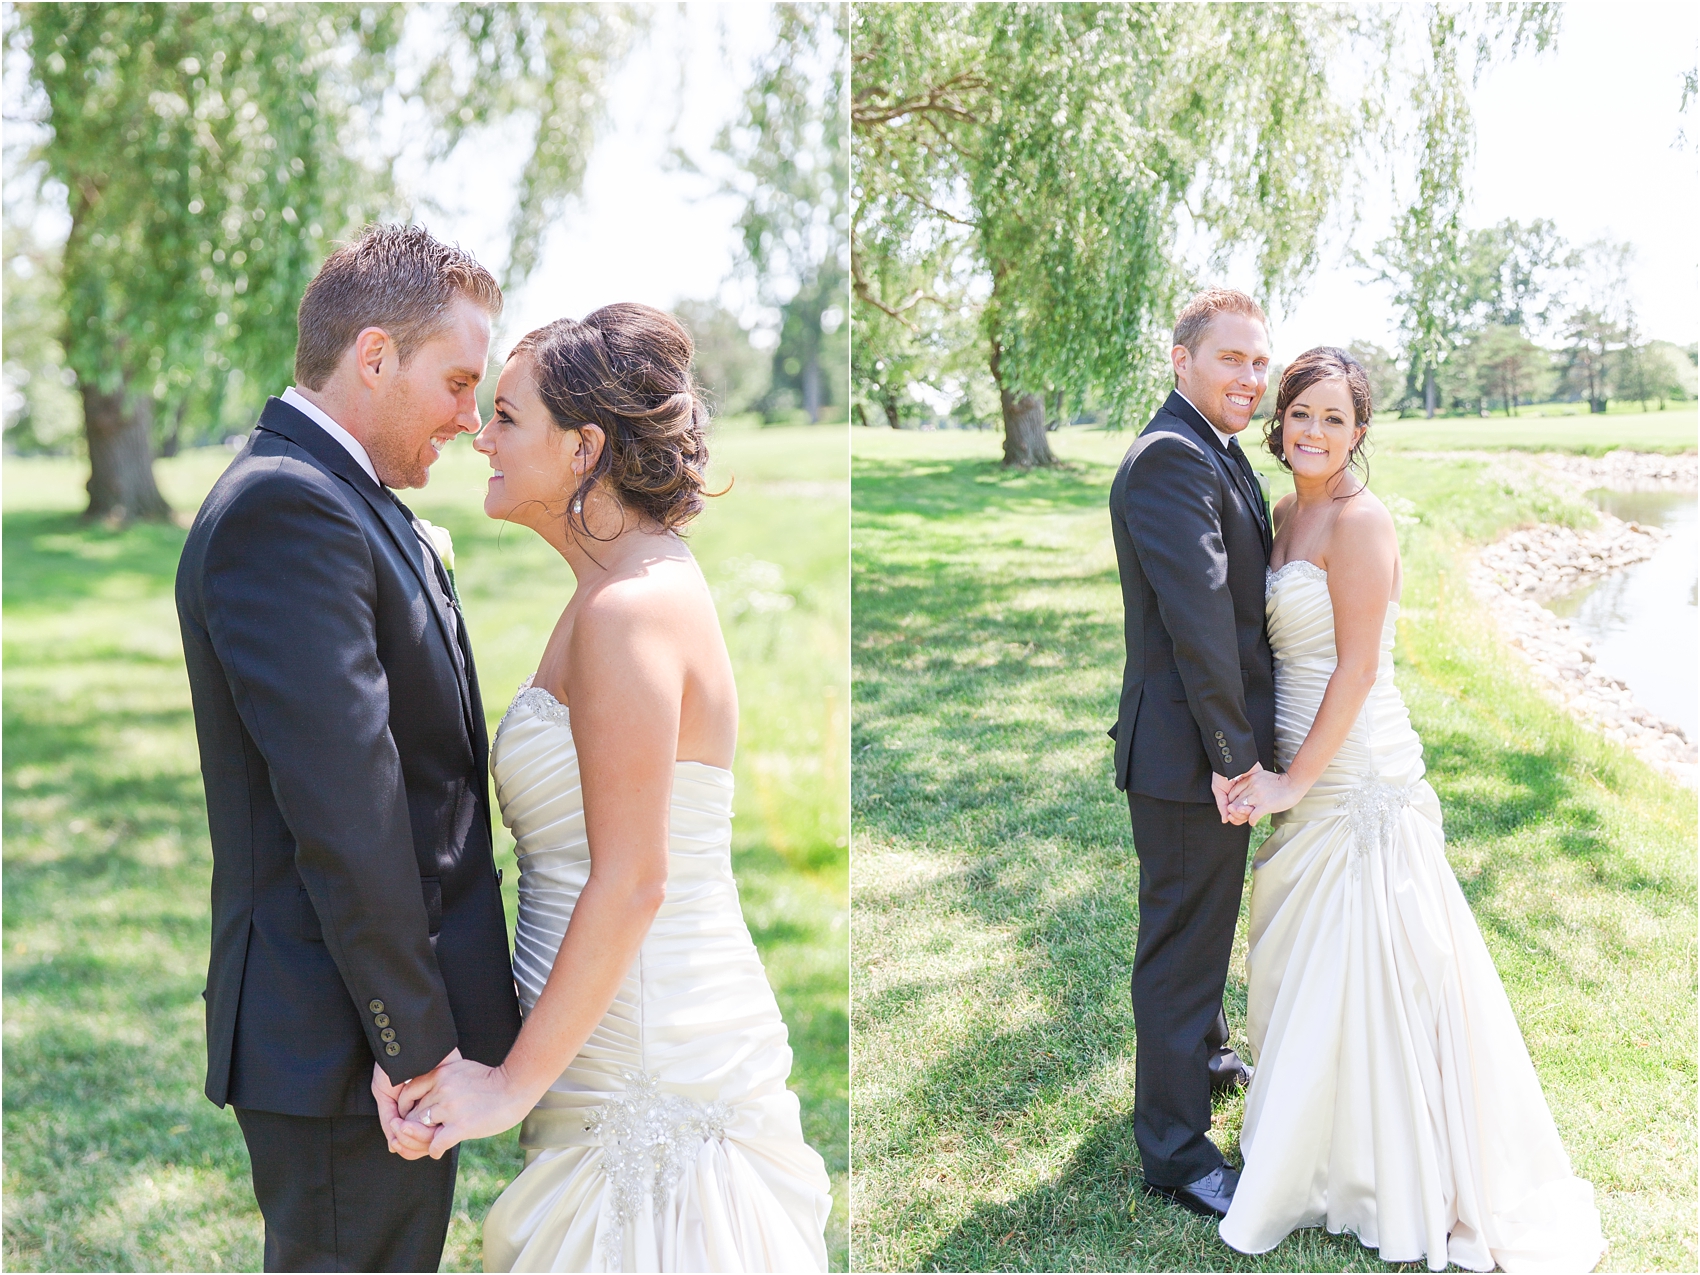 classic-wedding-photos-at-great-oaks-country-club-in-rochester-hills-mi-by-courtney-carolyn-photography_0037.jpg